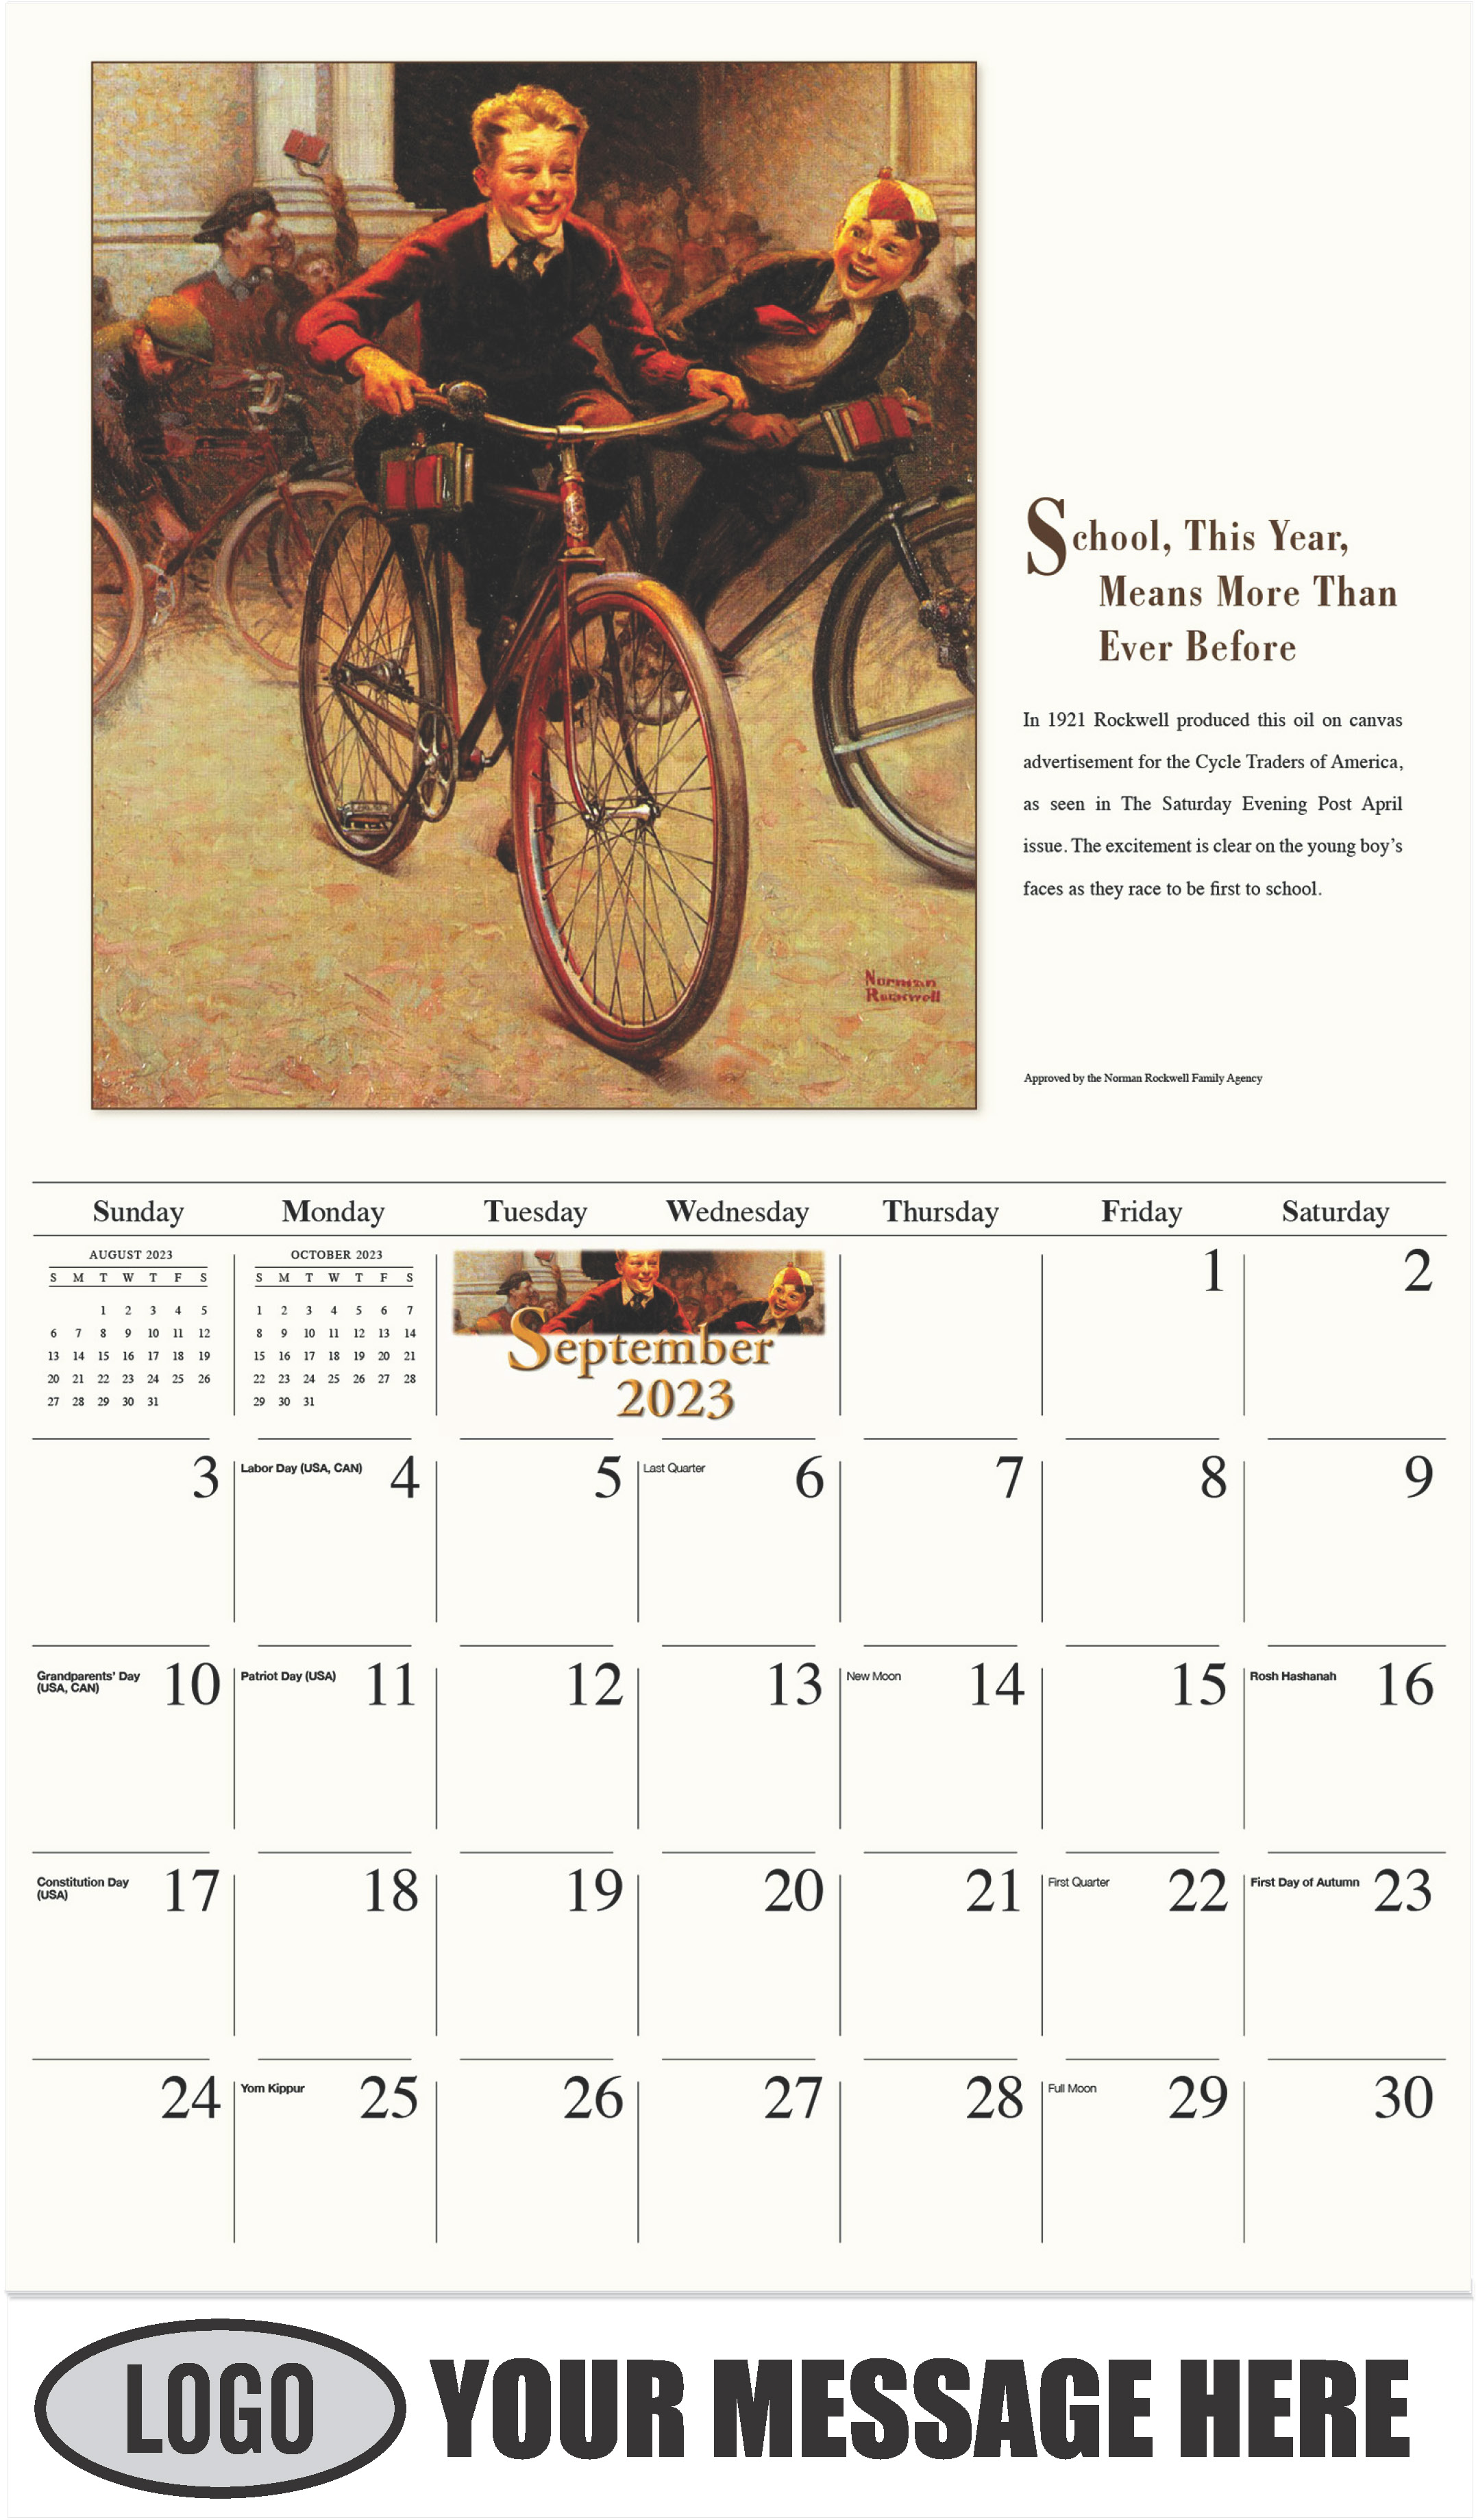 School, This Year, Means More Than Ever Before - September - Norman Rockwell - Memorable Images 2023 Promotional Calendar